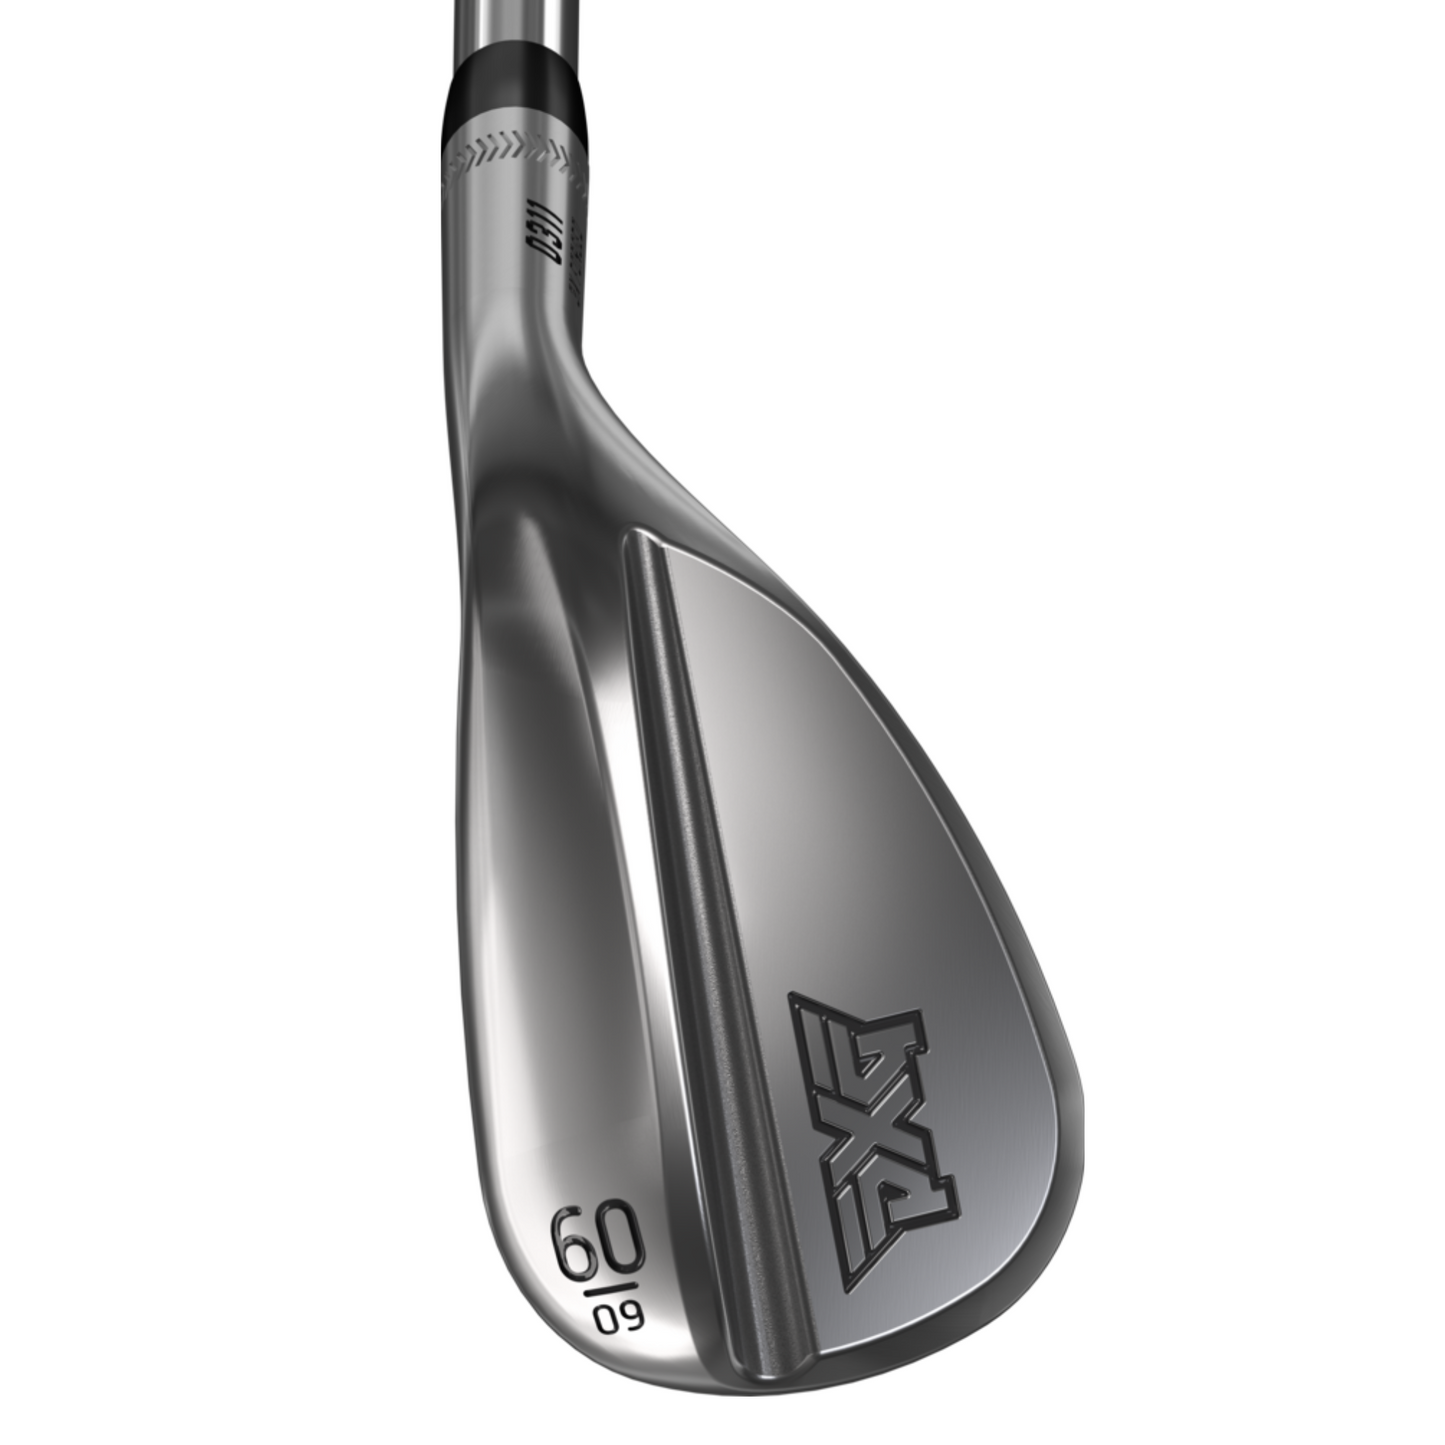 PXG 0311 V3 Forged Golf Wedge   